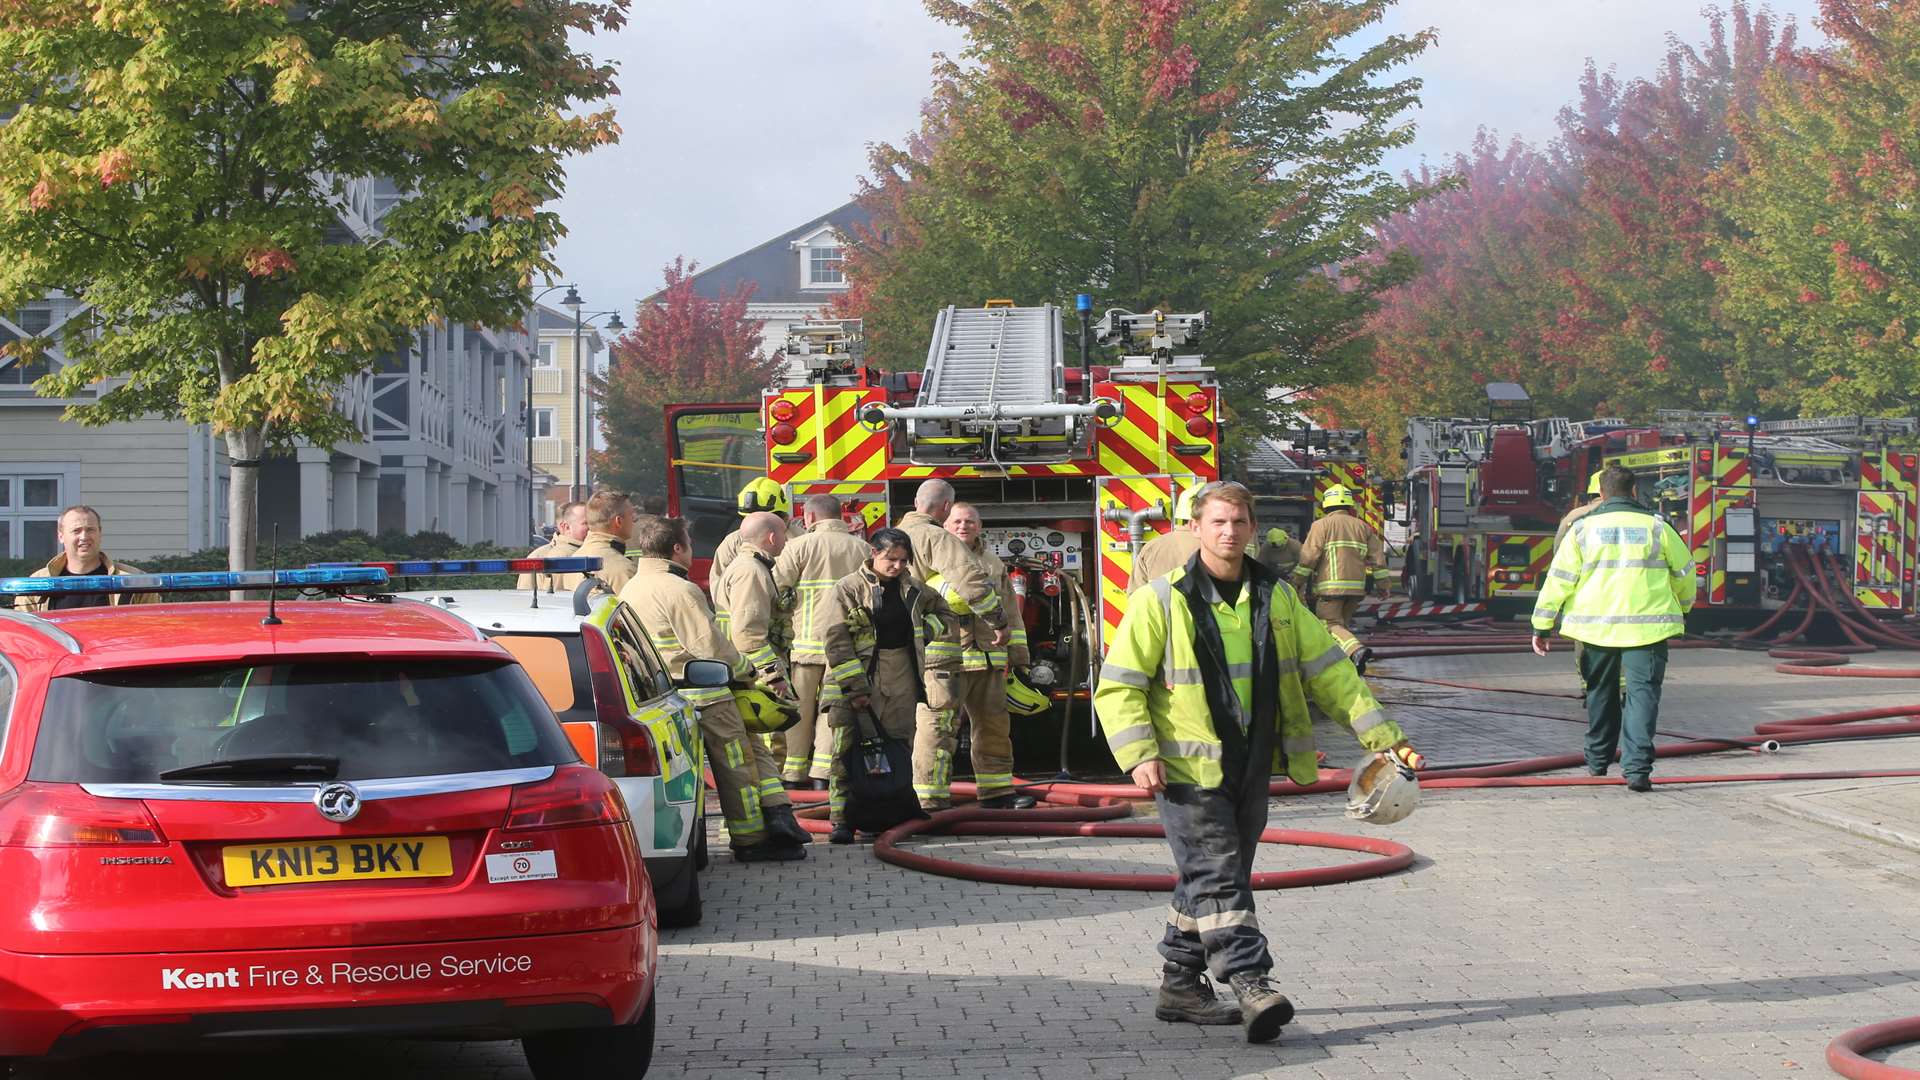 Up to 100 firefighters rushed to the scene at the height of the major blaze. Many are expected to remain for most of Saturday. Picture: John Westhrop